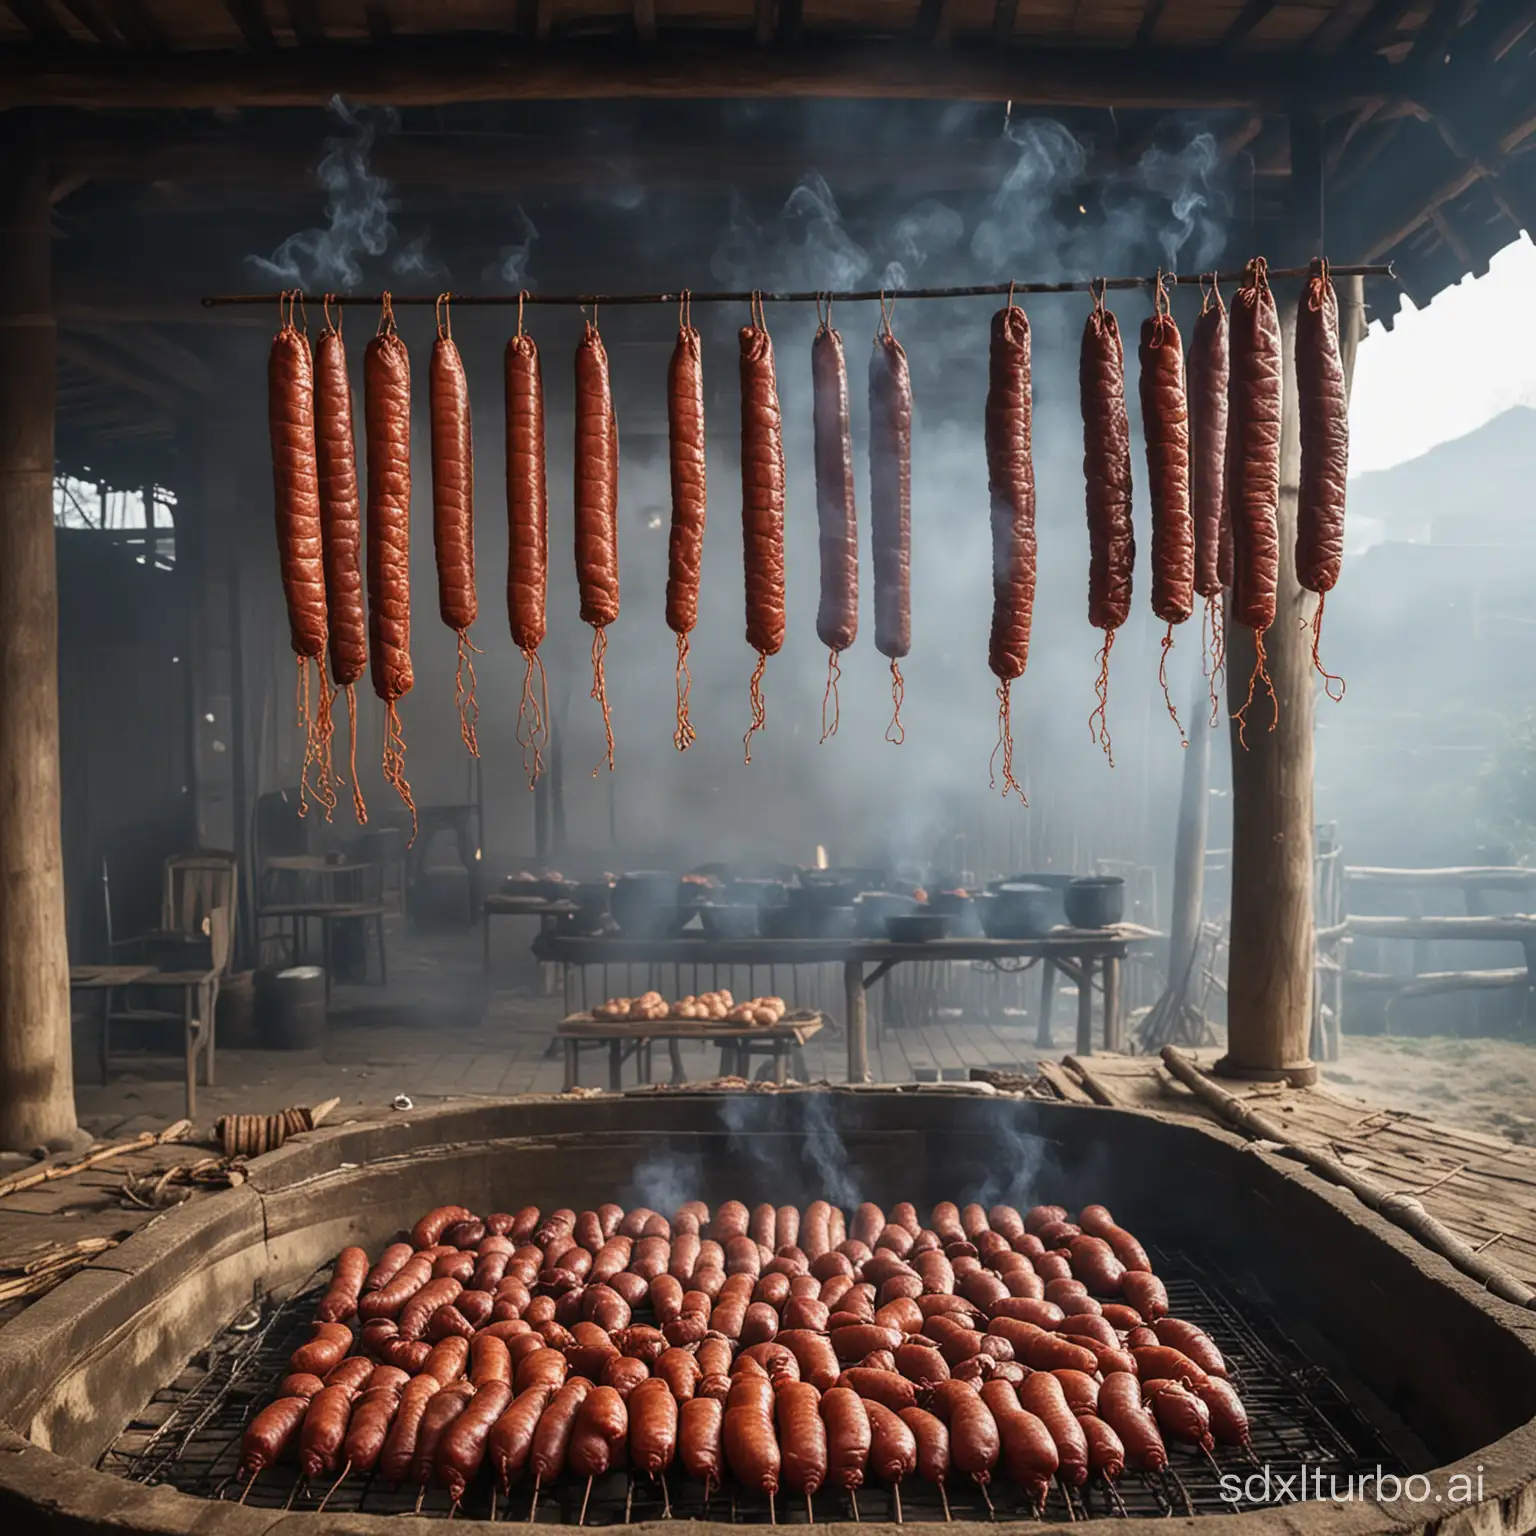 Rustic-Charm-Traditional-Smoked-Sausage-Making-in-Rural-China